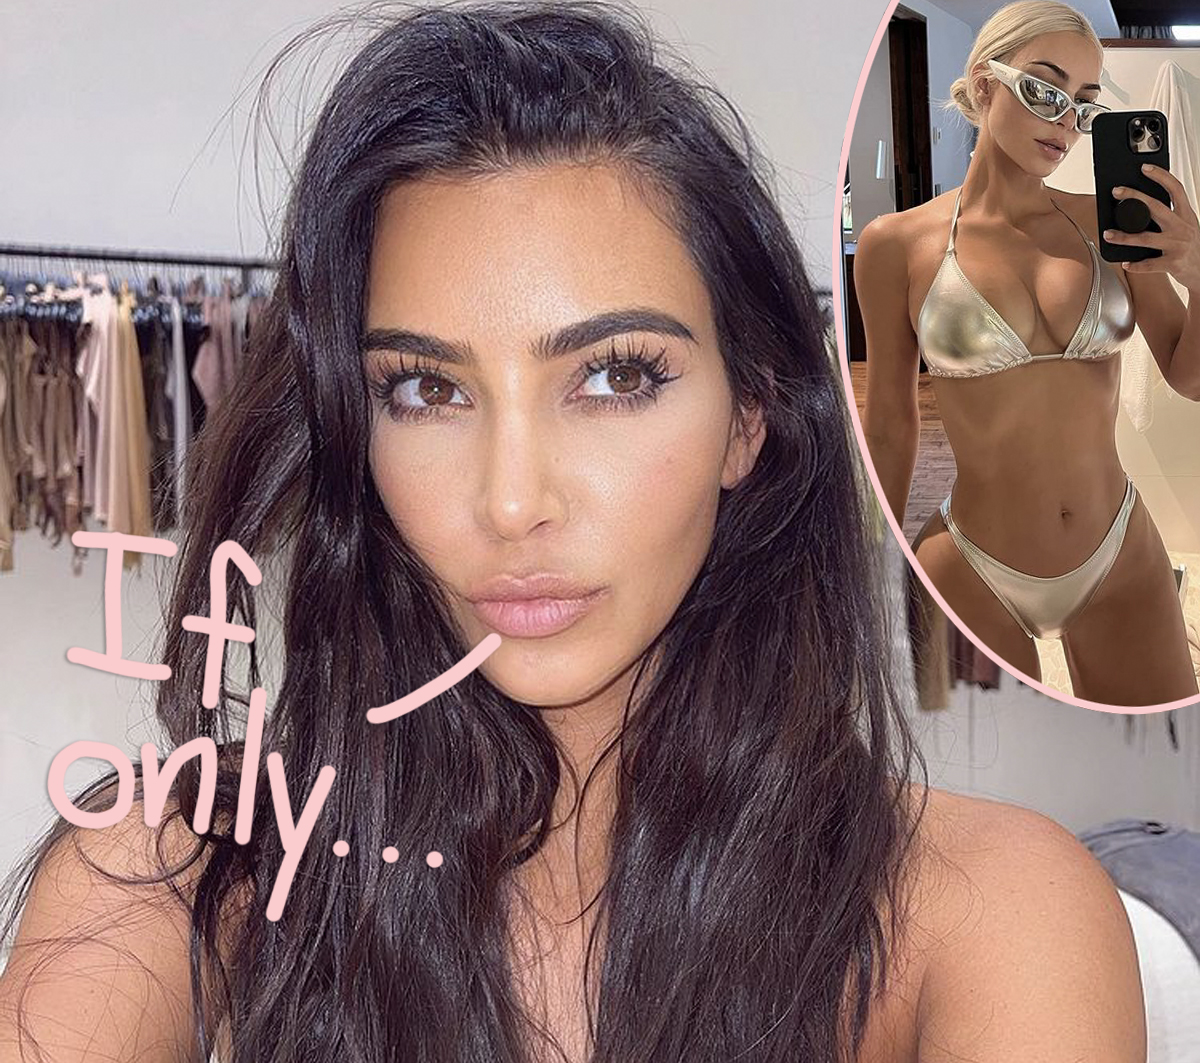 #Kim Kardashian Gets Kryptic! But What Is She Calling Out??